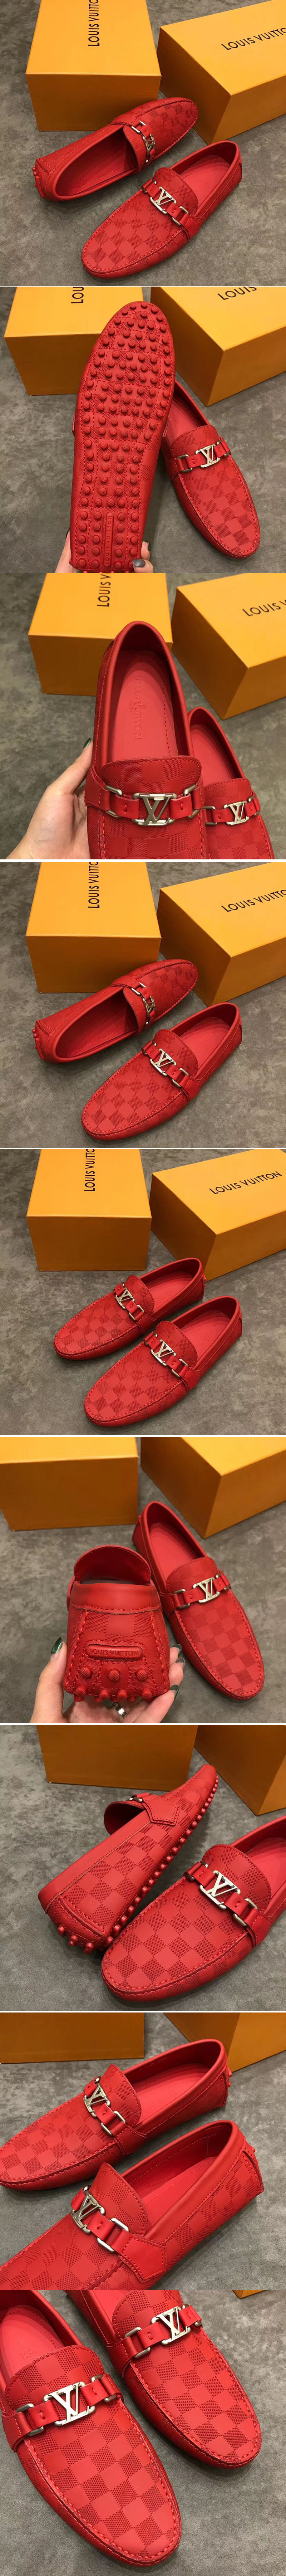 Replica Louis Vuitton LV Hockenheim Loafer And Shoes Damier Embossed Calf leather Red